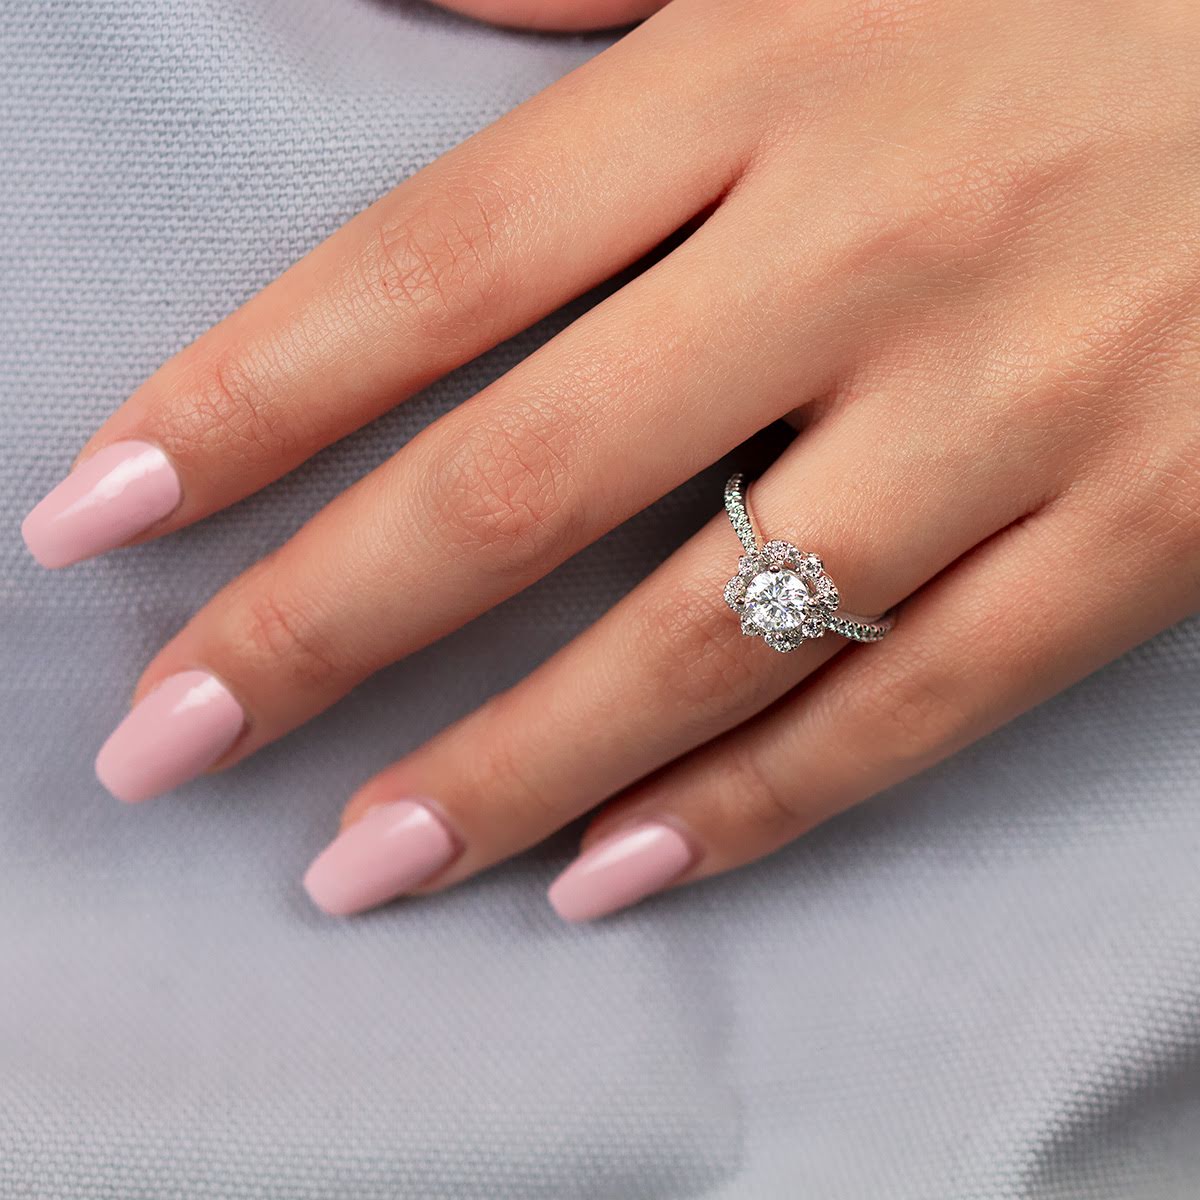 Floral-Inspired Engagement Ring - Michael E. Minden Diamond Jewelers